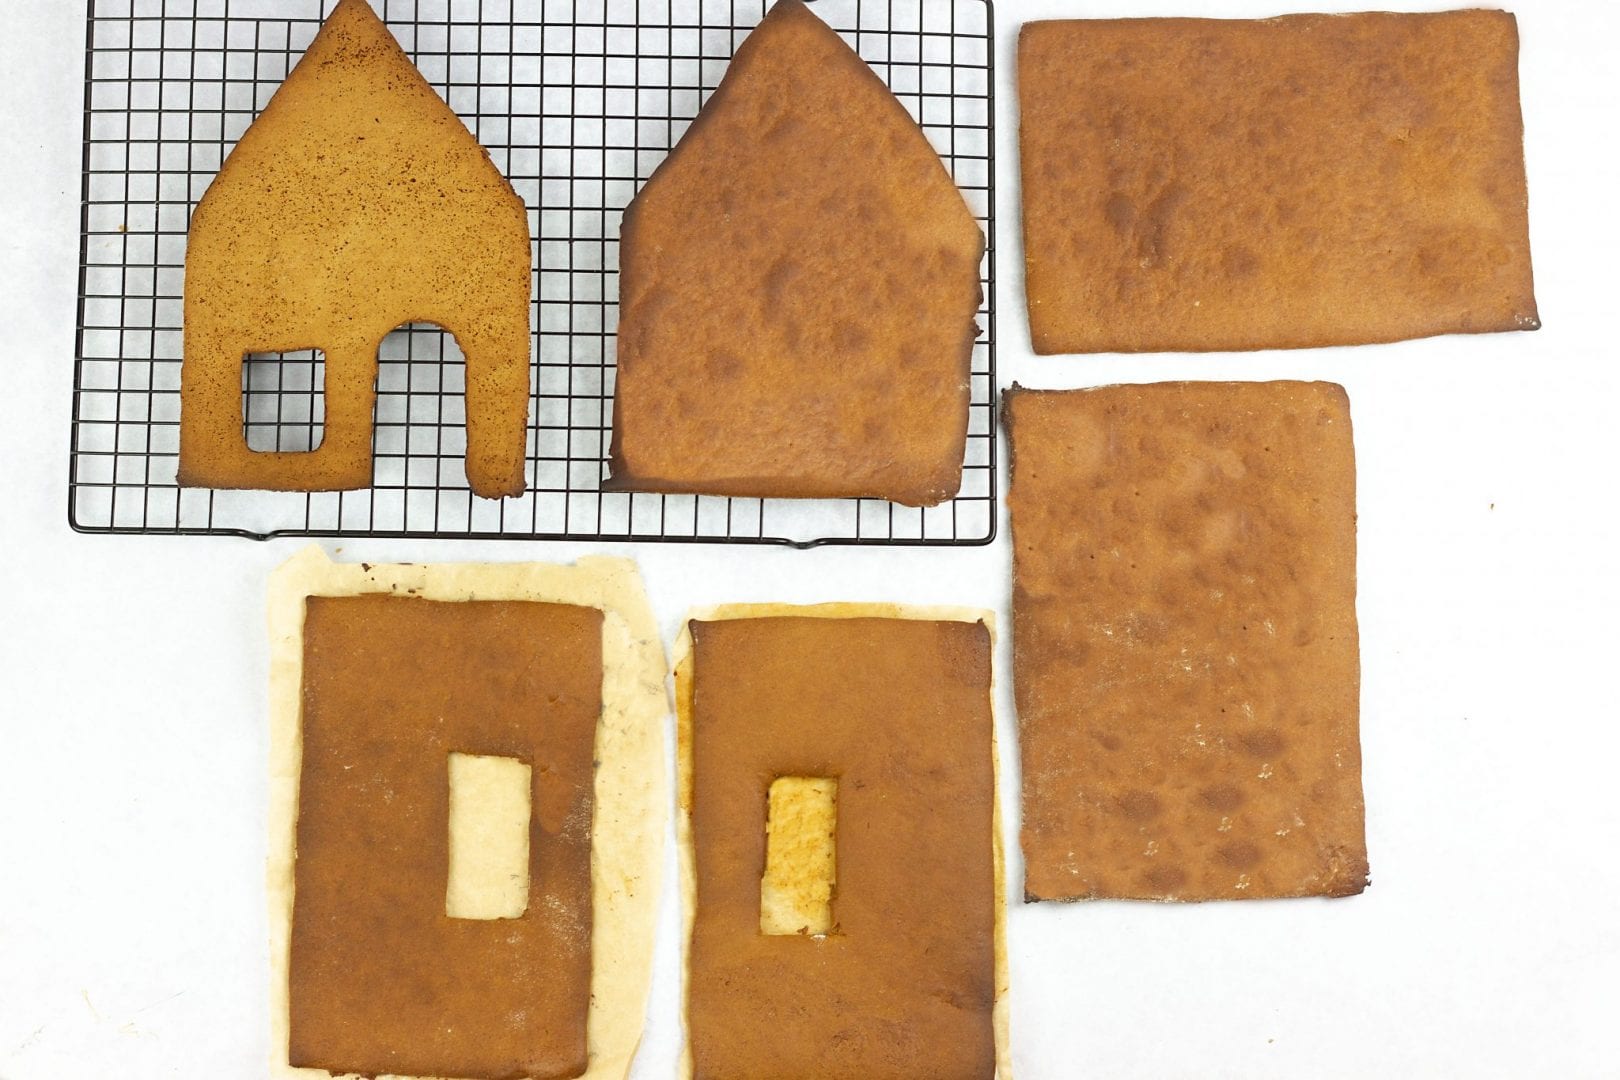 Gingerbread house, homemade and gluten free | Festive Treats